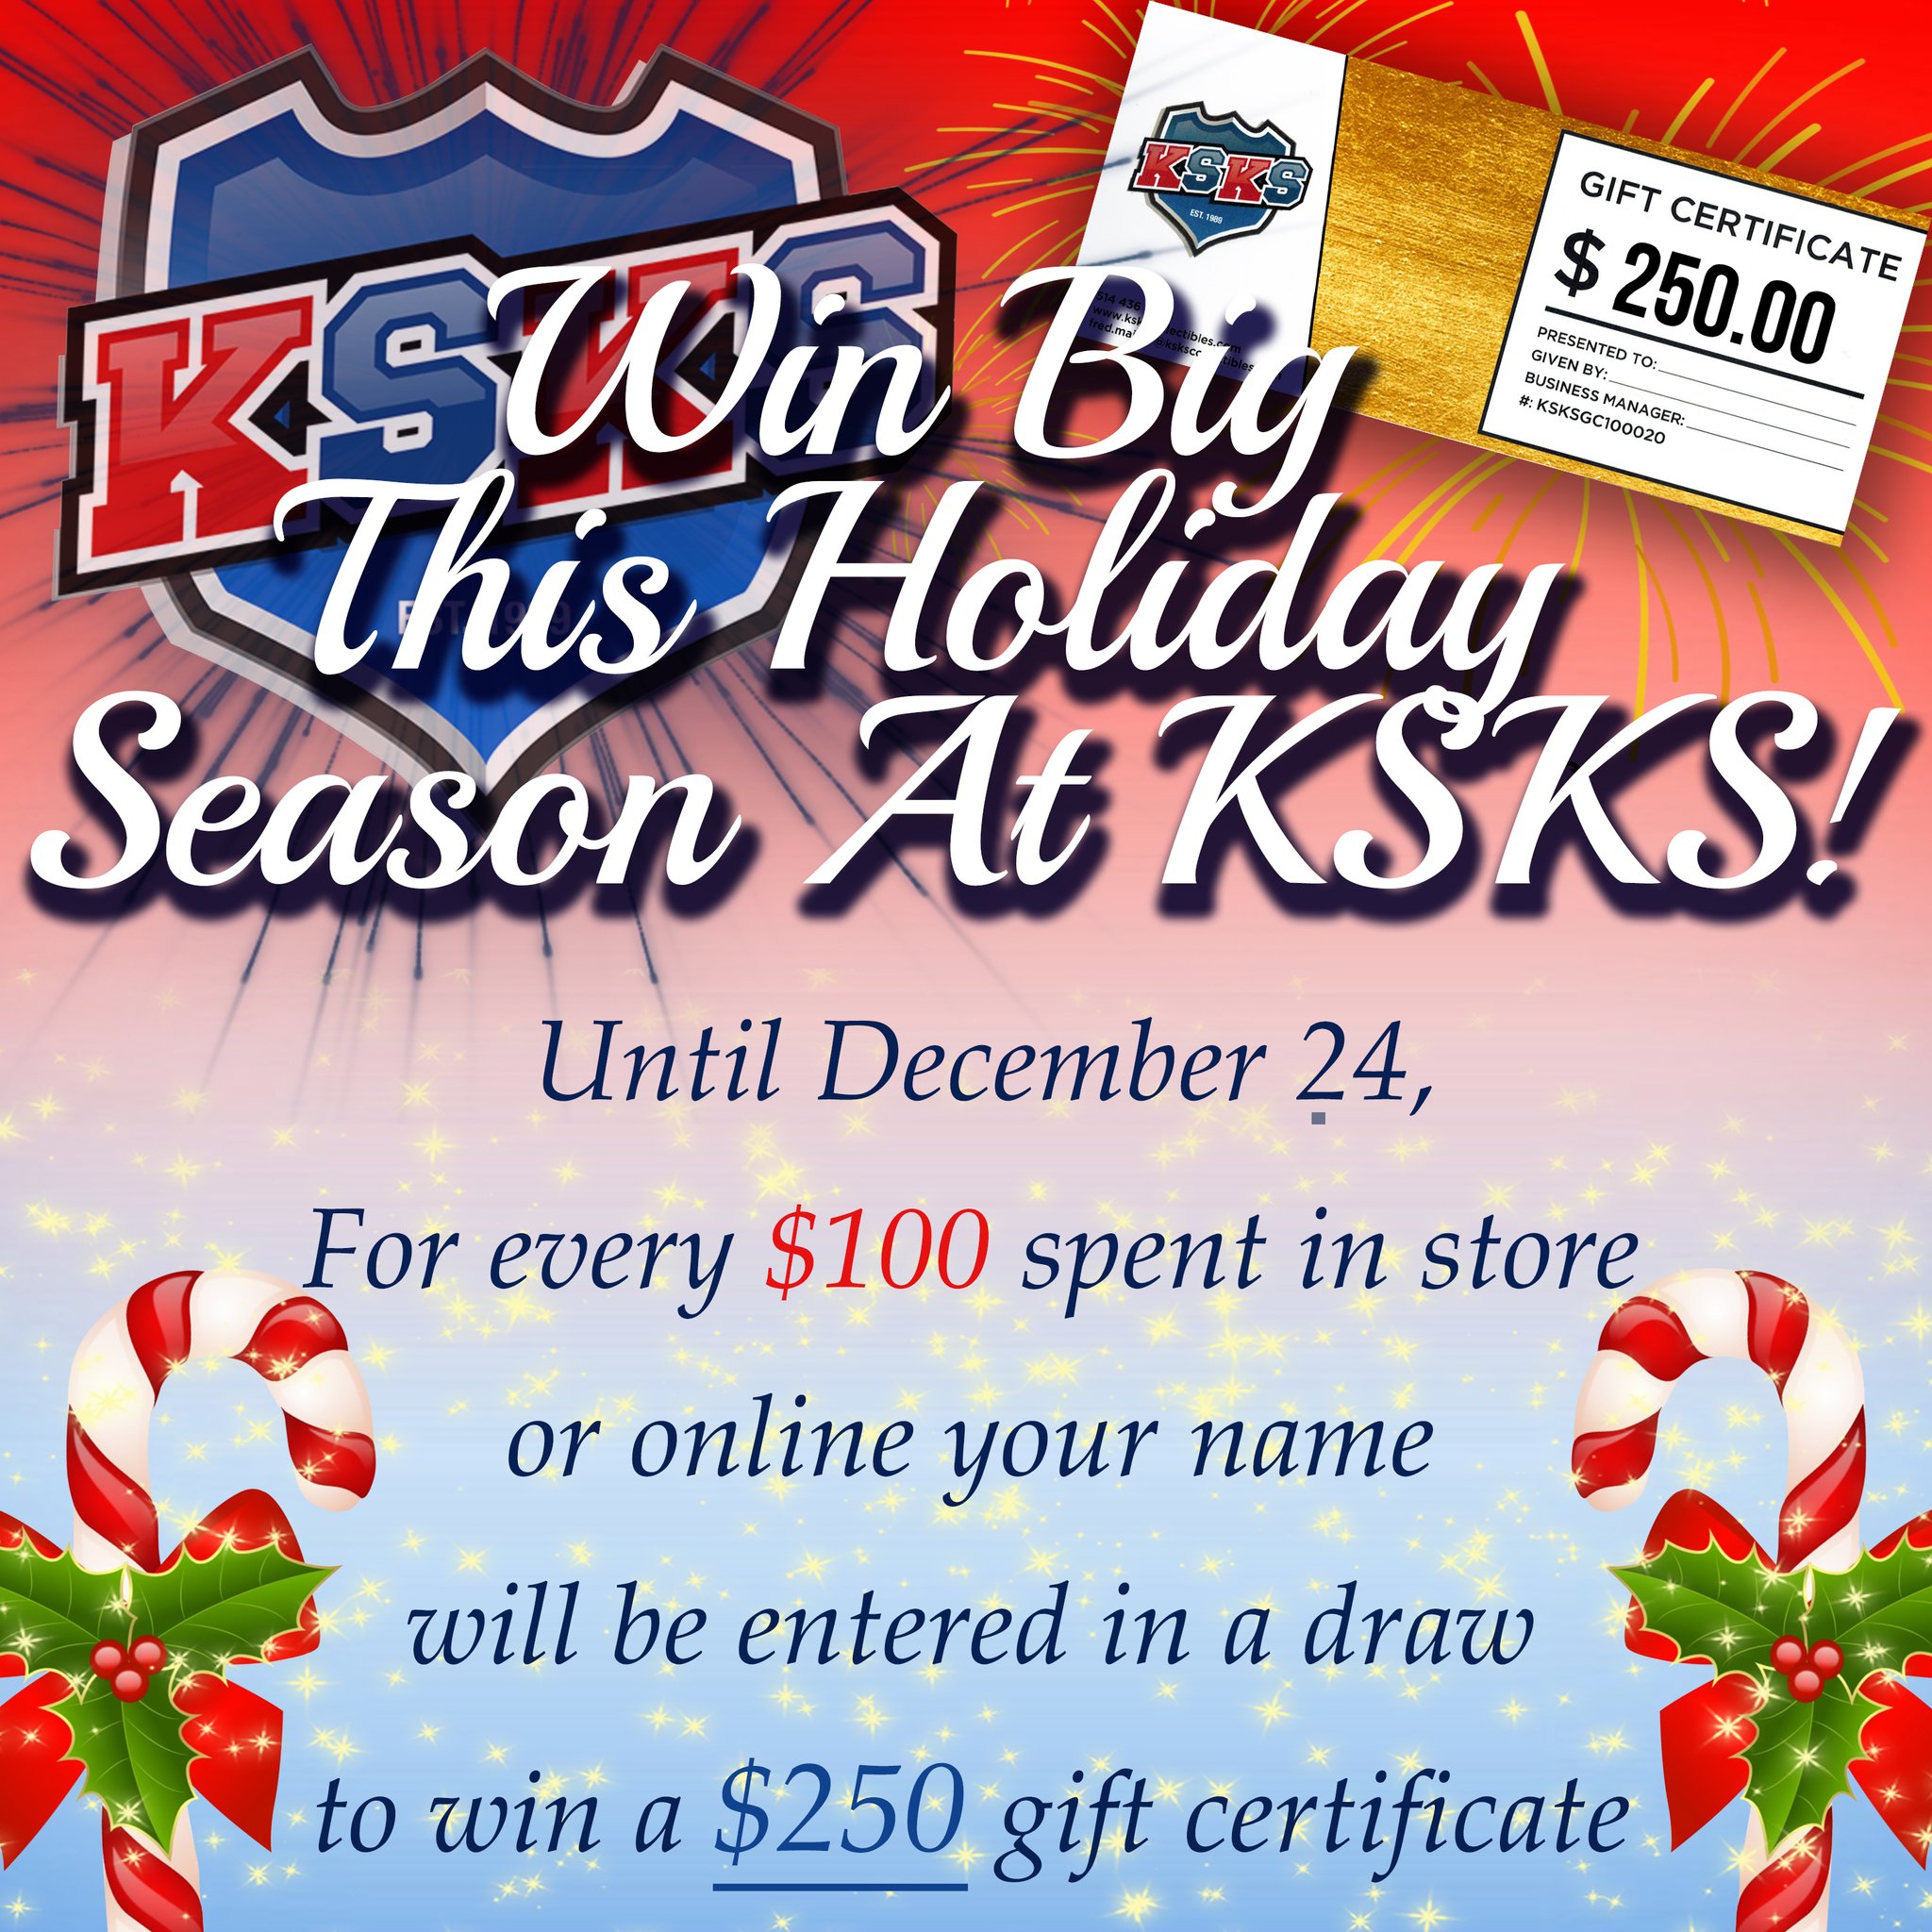 KSKS Sports Collectibles Inc.